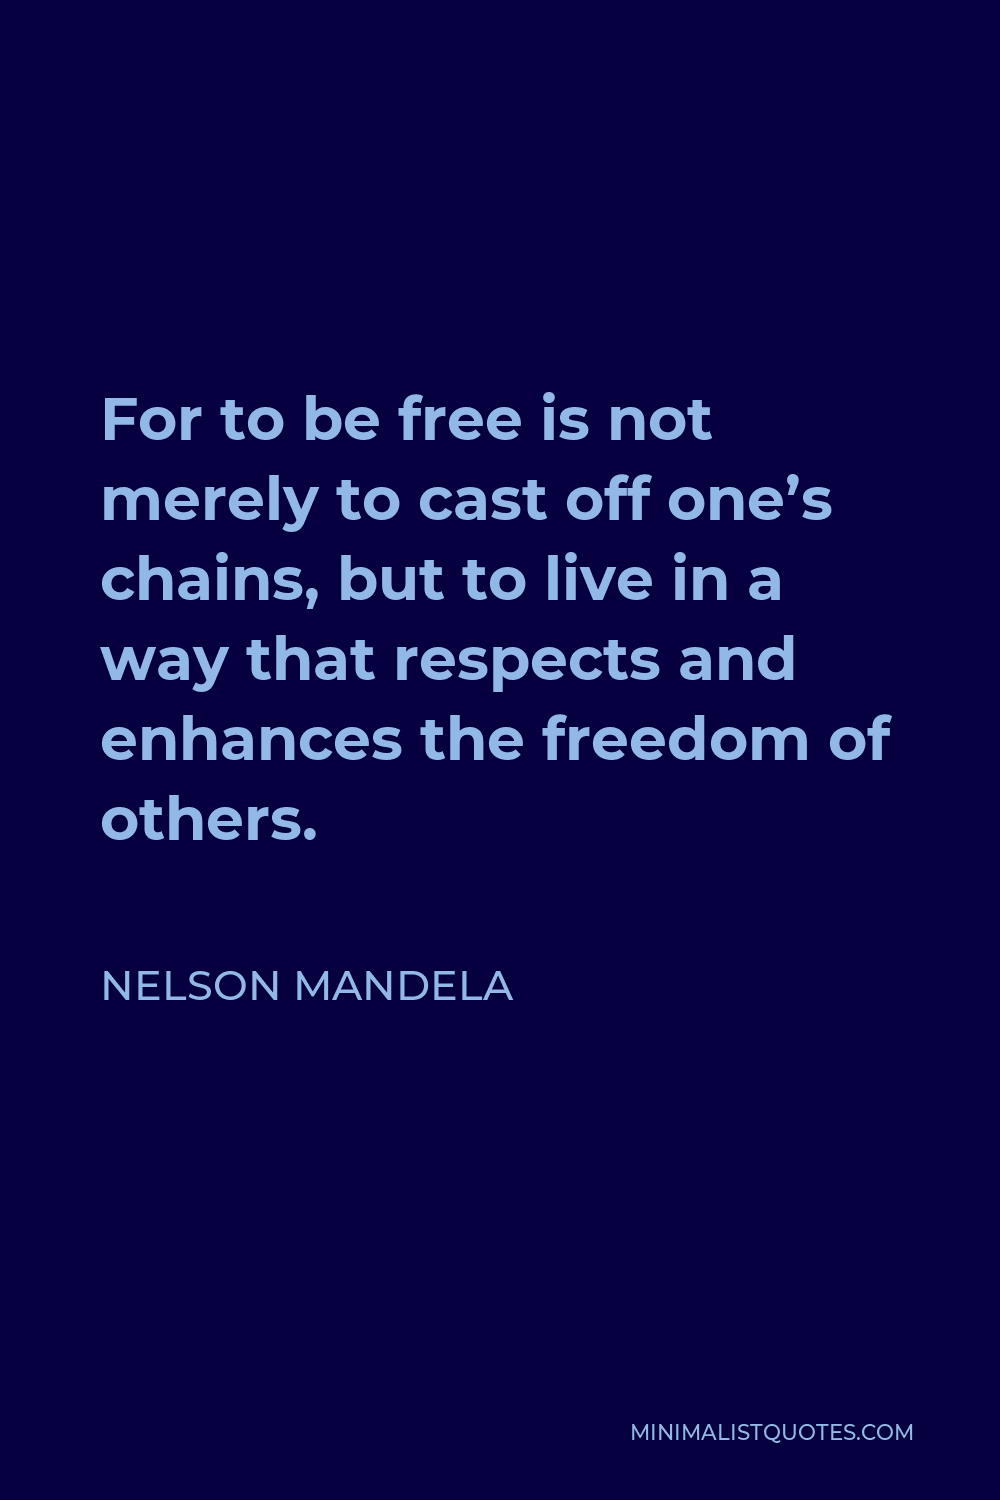 Nelson Mandela Quote - For to be free is not merely to cast off one’s chains, but to live in a way that respects and enhances the freedom of others.